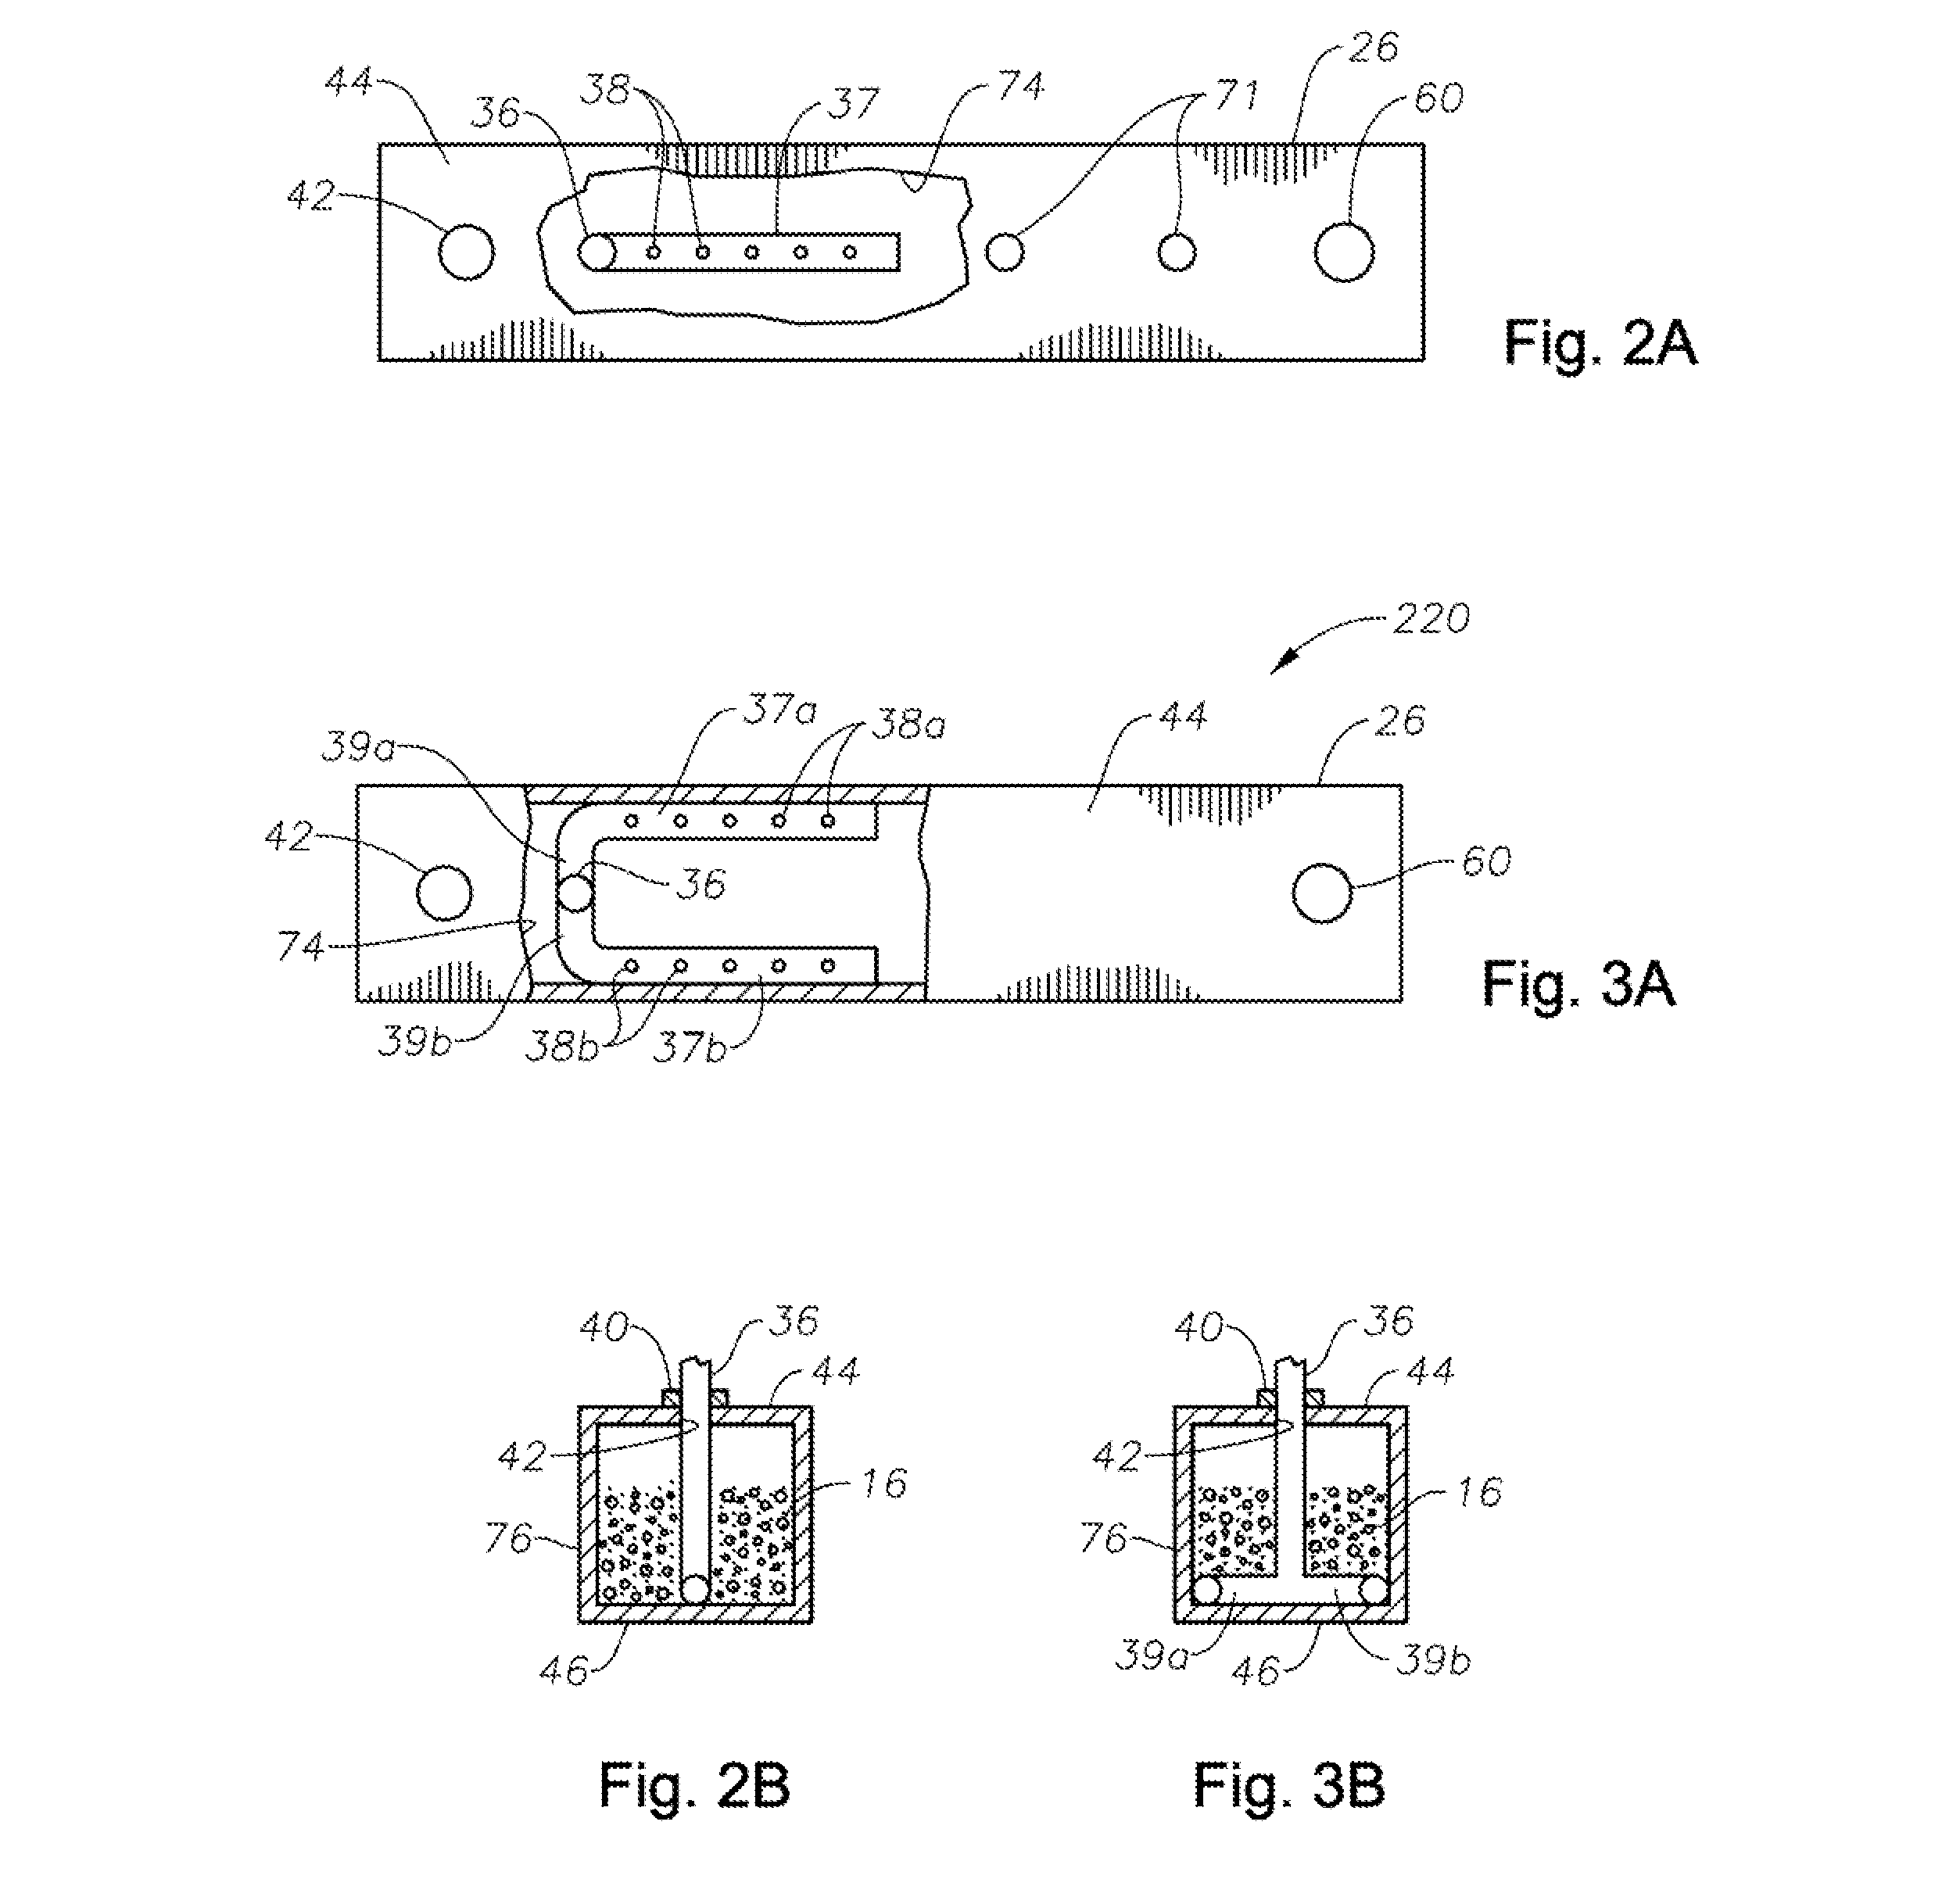 Apparatus, systems and methods for reducing foaming downstream of a submerged combustion melter producing molten glass